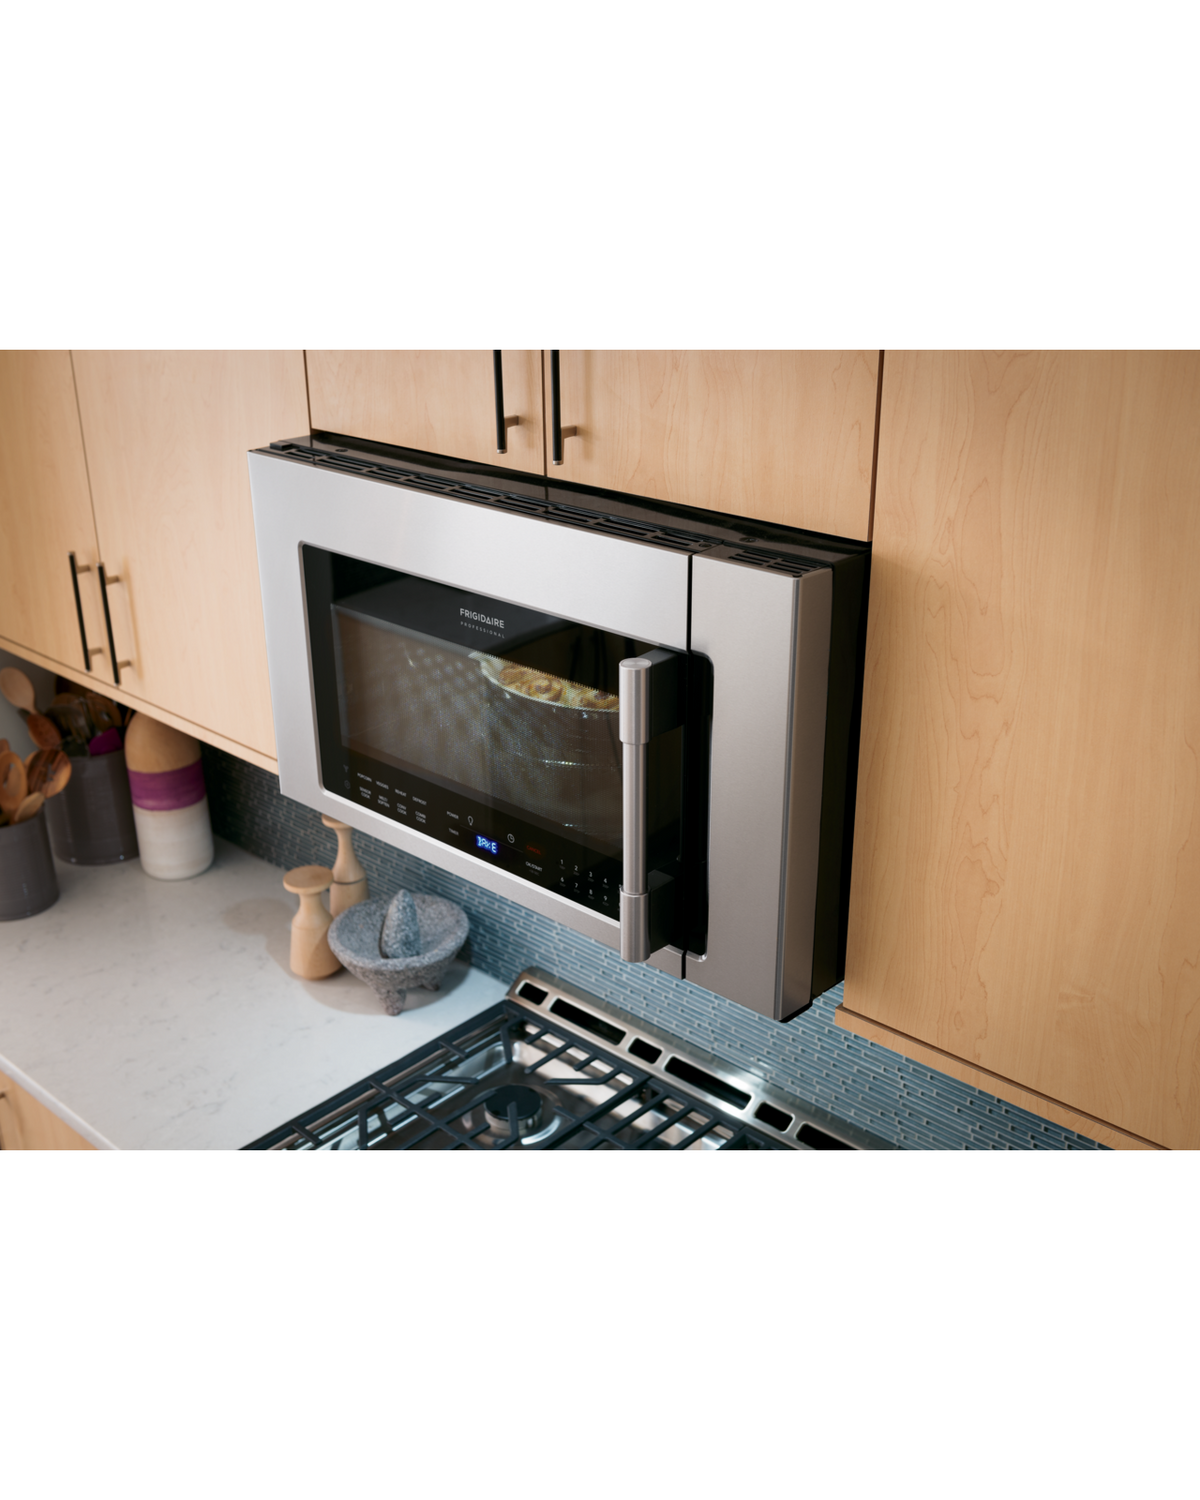 FRIGIDAIRE FPBM3077RF Professional 1.8 Cu. Ft. 2-In-1 Over-The-Range Convection Microwave